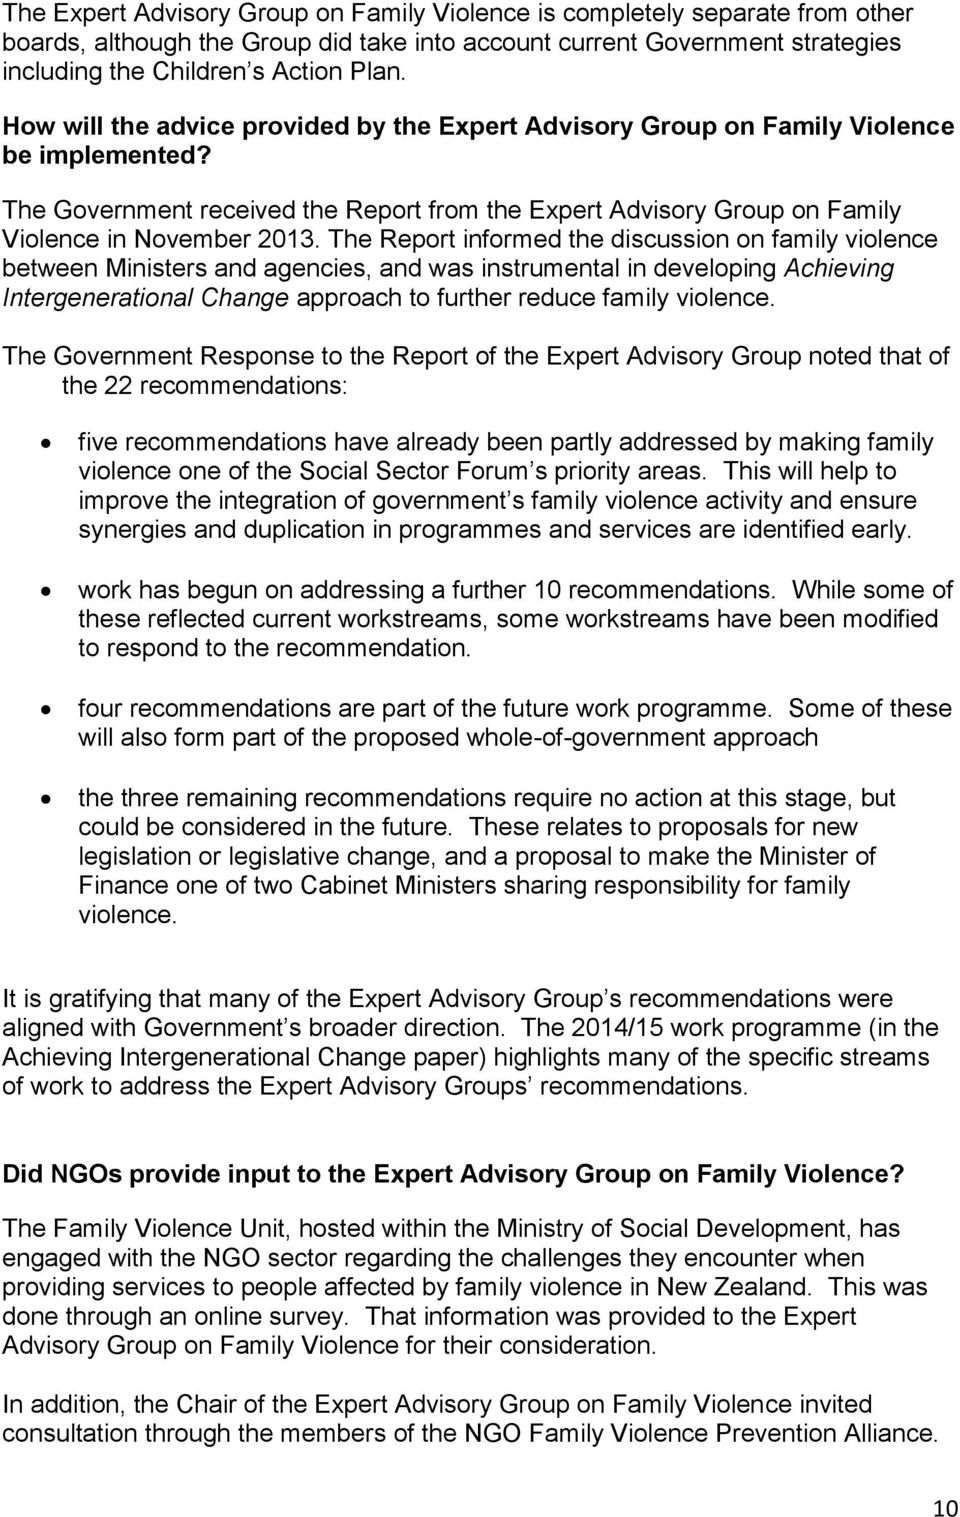 The Report informed the discussion on family violence between Ministers and agencies, and was instrumental in developing Achieving Intergenerational Change approach to further reduce family violence.